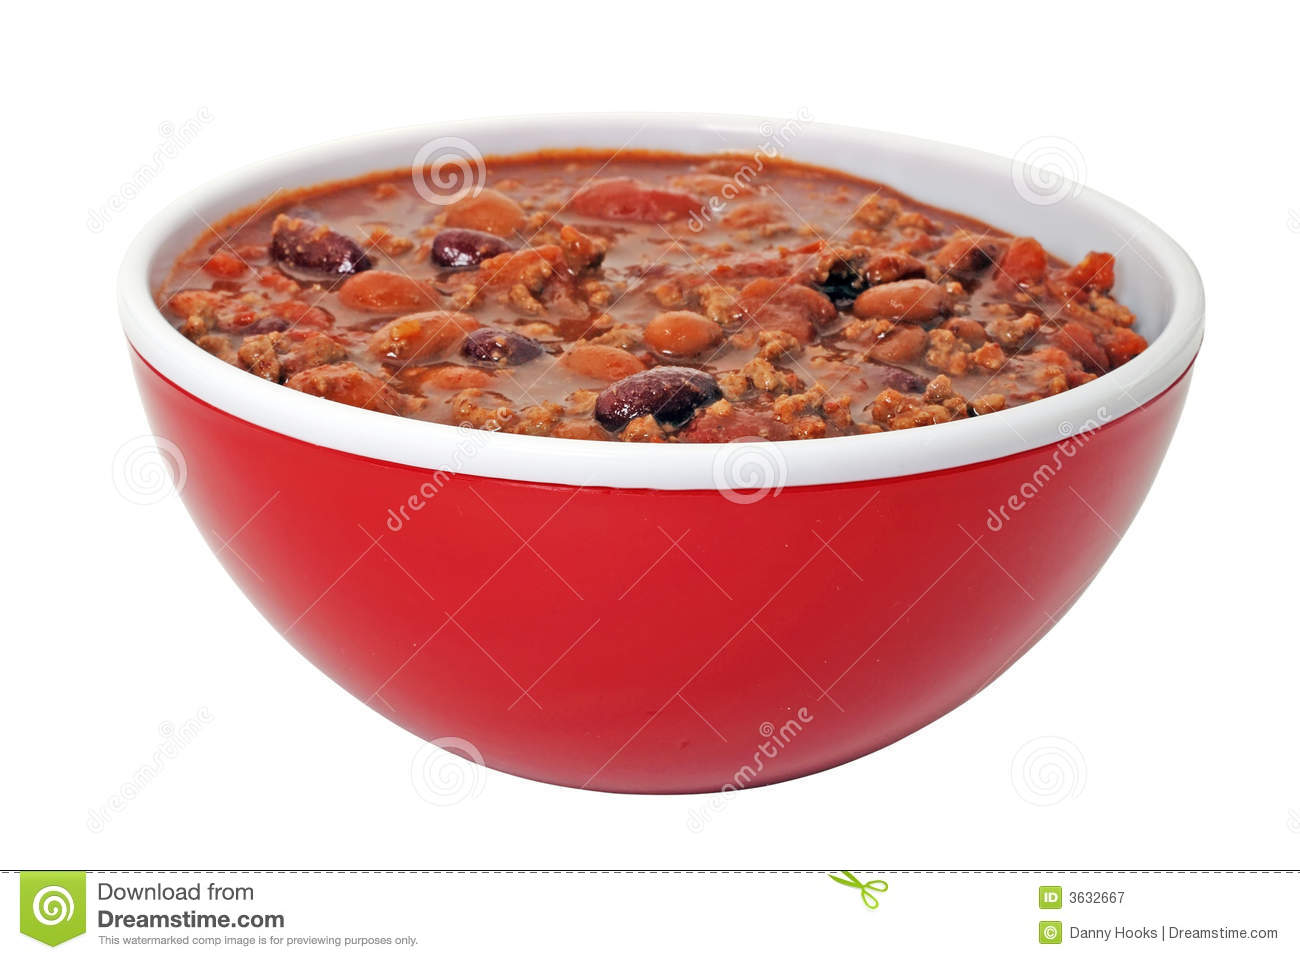 Bowl Of Hot Chili With Beans  Isolated On White Background With    